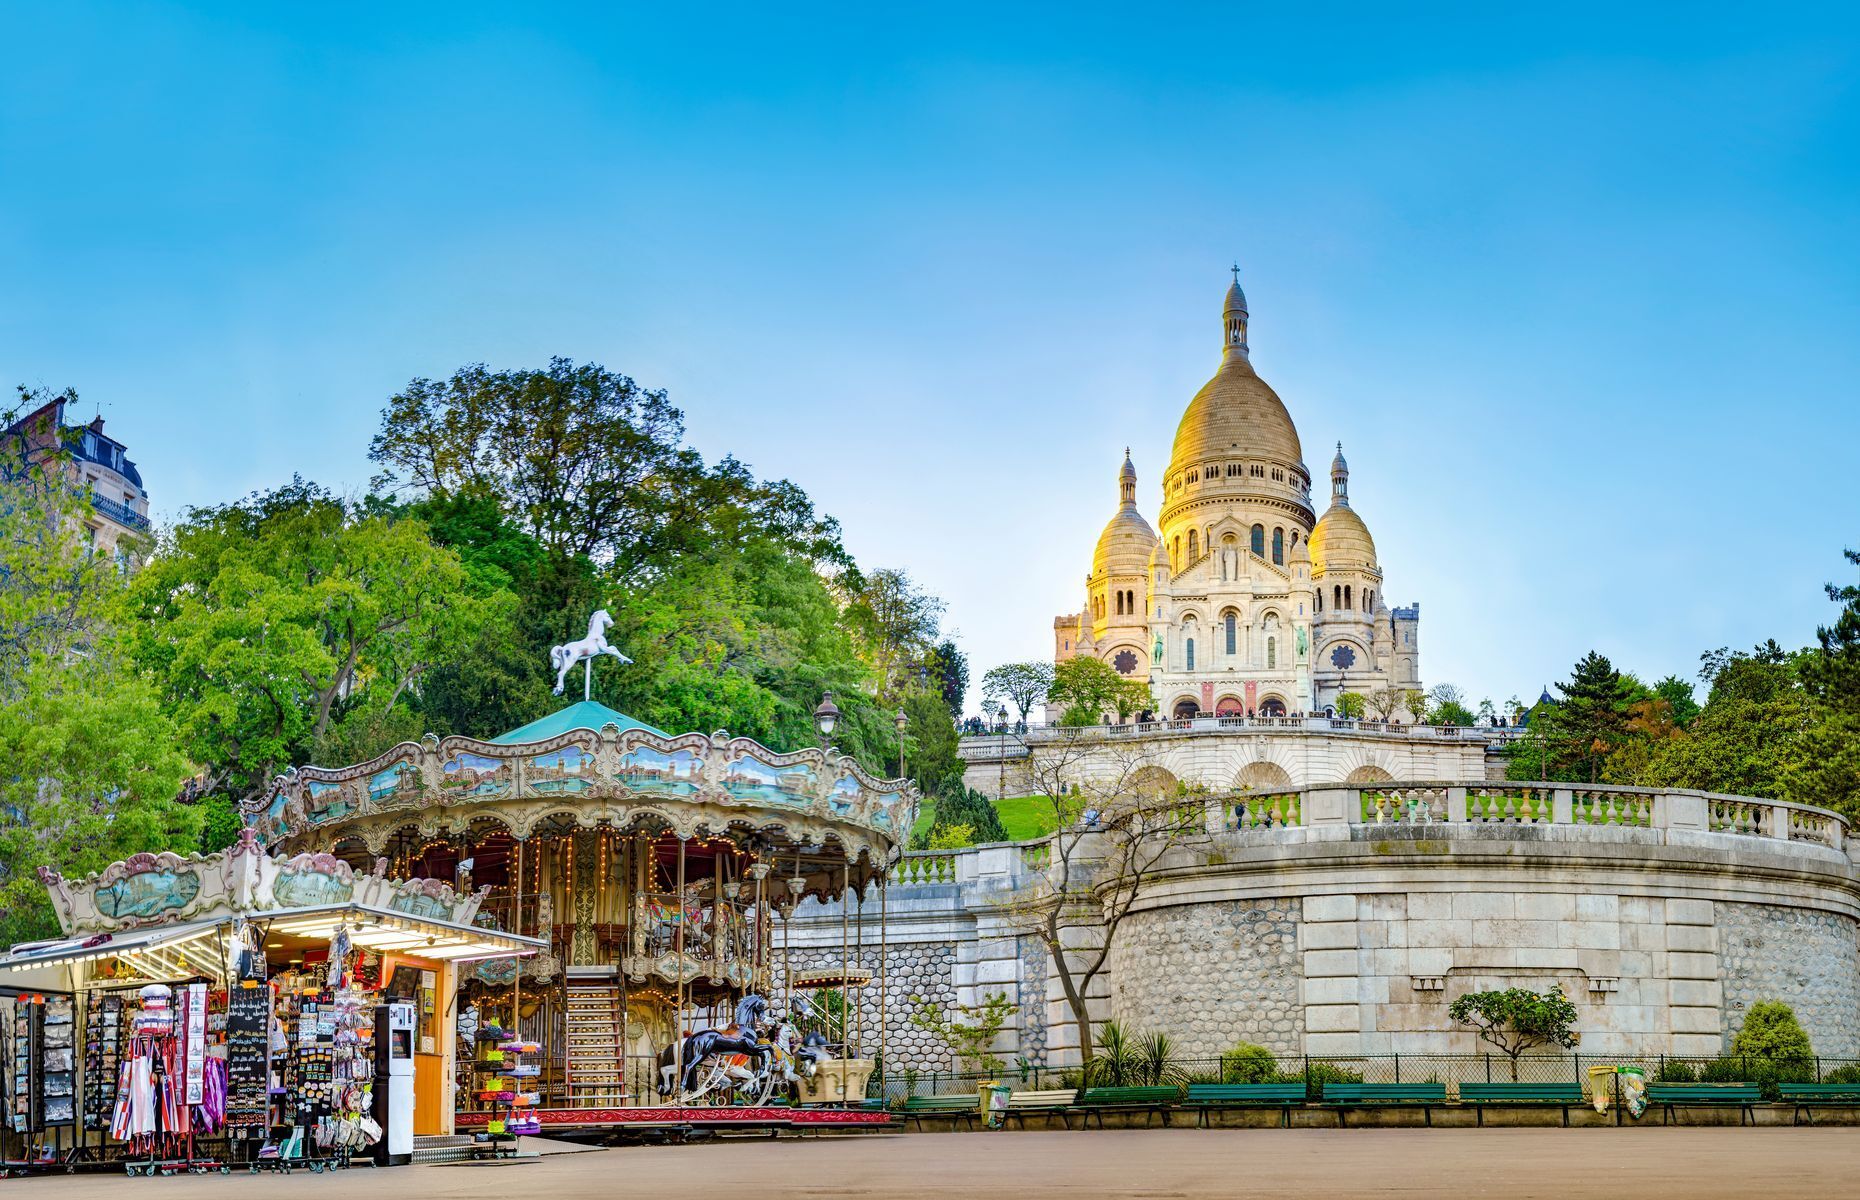 <p>A top attraction in the Butte Montmartre area, the Sacré-Cœur Basilica receives <a href="https://www.sacre-coeur-montmartre.com/english/visit-and-audio-guide/article/four-steps-to-learn-more-about" rel="noreferrer noopener">more than 11 million visitors</a> per year. Sightseers can take a funicular or climb nearly 300 steps to the capital’s highest point. Erected in memory of those who died in the Franco-Prussian war (1870–71), the basilica was completed on the eve of the First World War. <a href="https://www.sacre-coeur-montmartre.com/english/history-and-visit/article/the-origin-of-the-construction-of" rel="noreferrer noopener">Built with donations</a> from the French people, the structure boasts a distinct Romanesque-Byzantine style.</p>